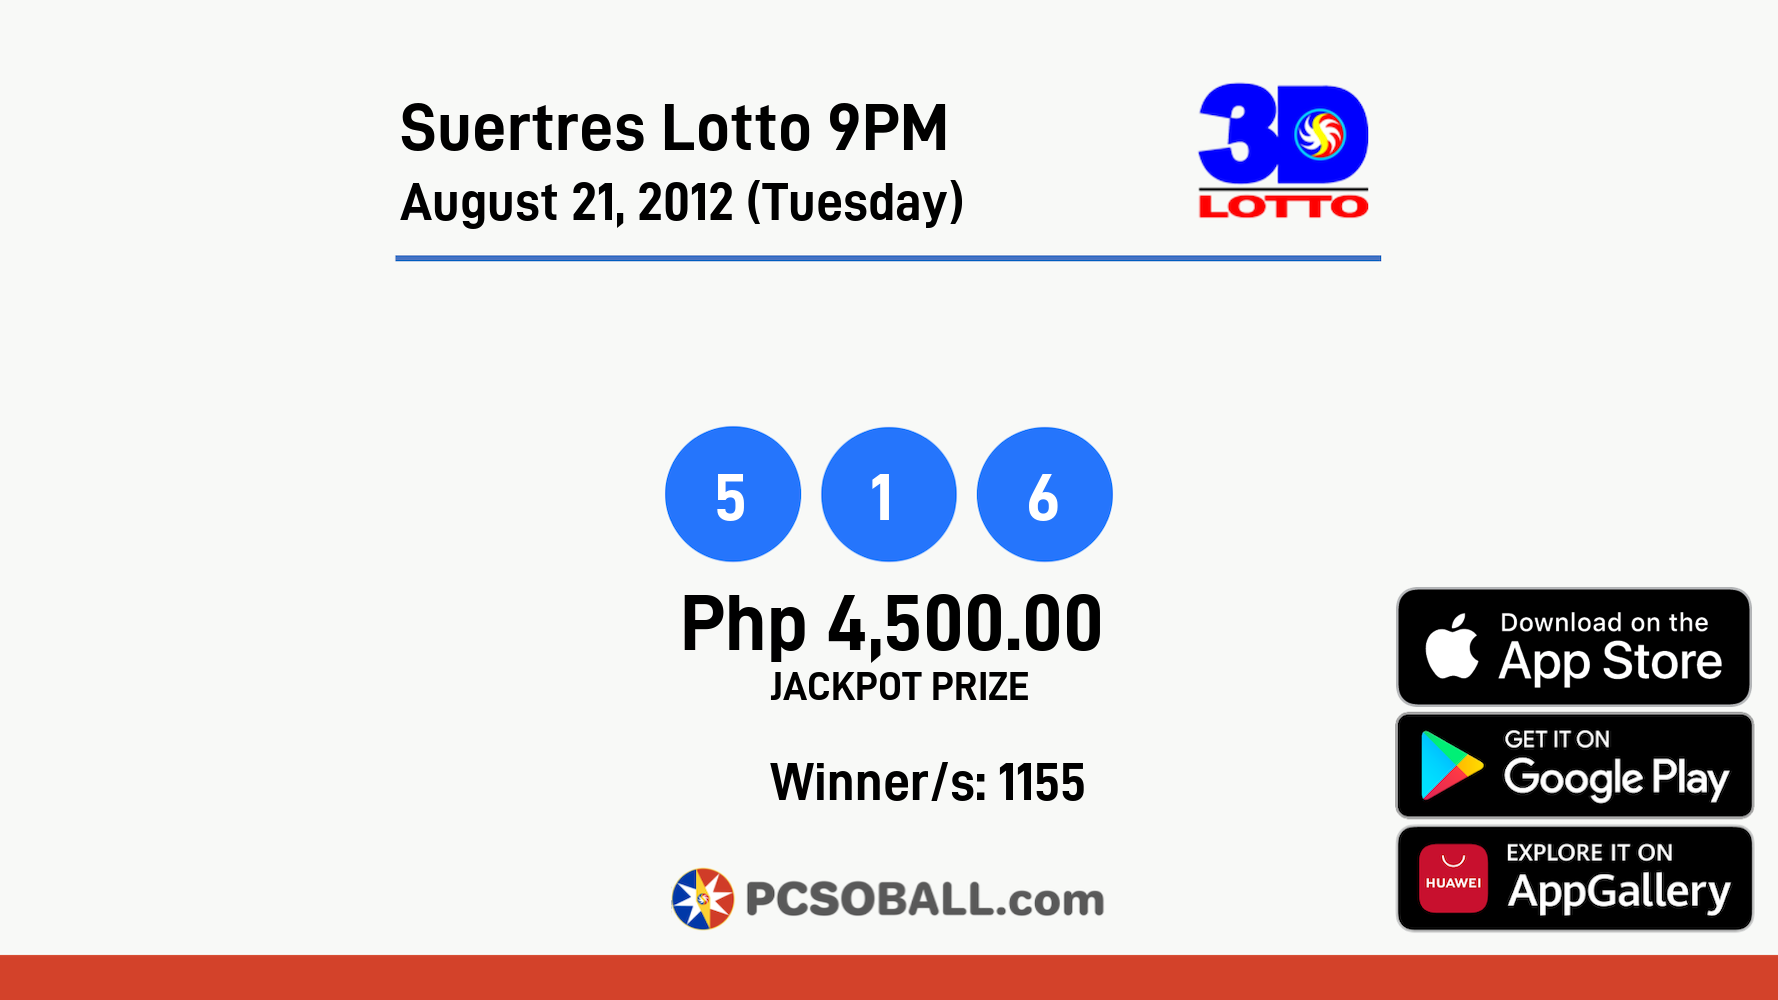 Suertres Lotto 9PM August 21, 2012 (Tuesday) Result